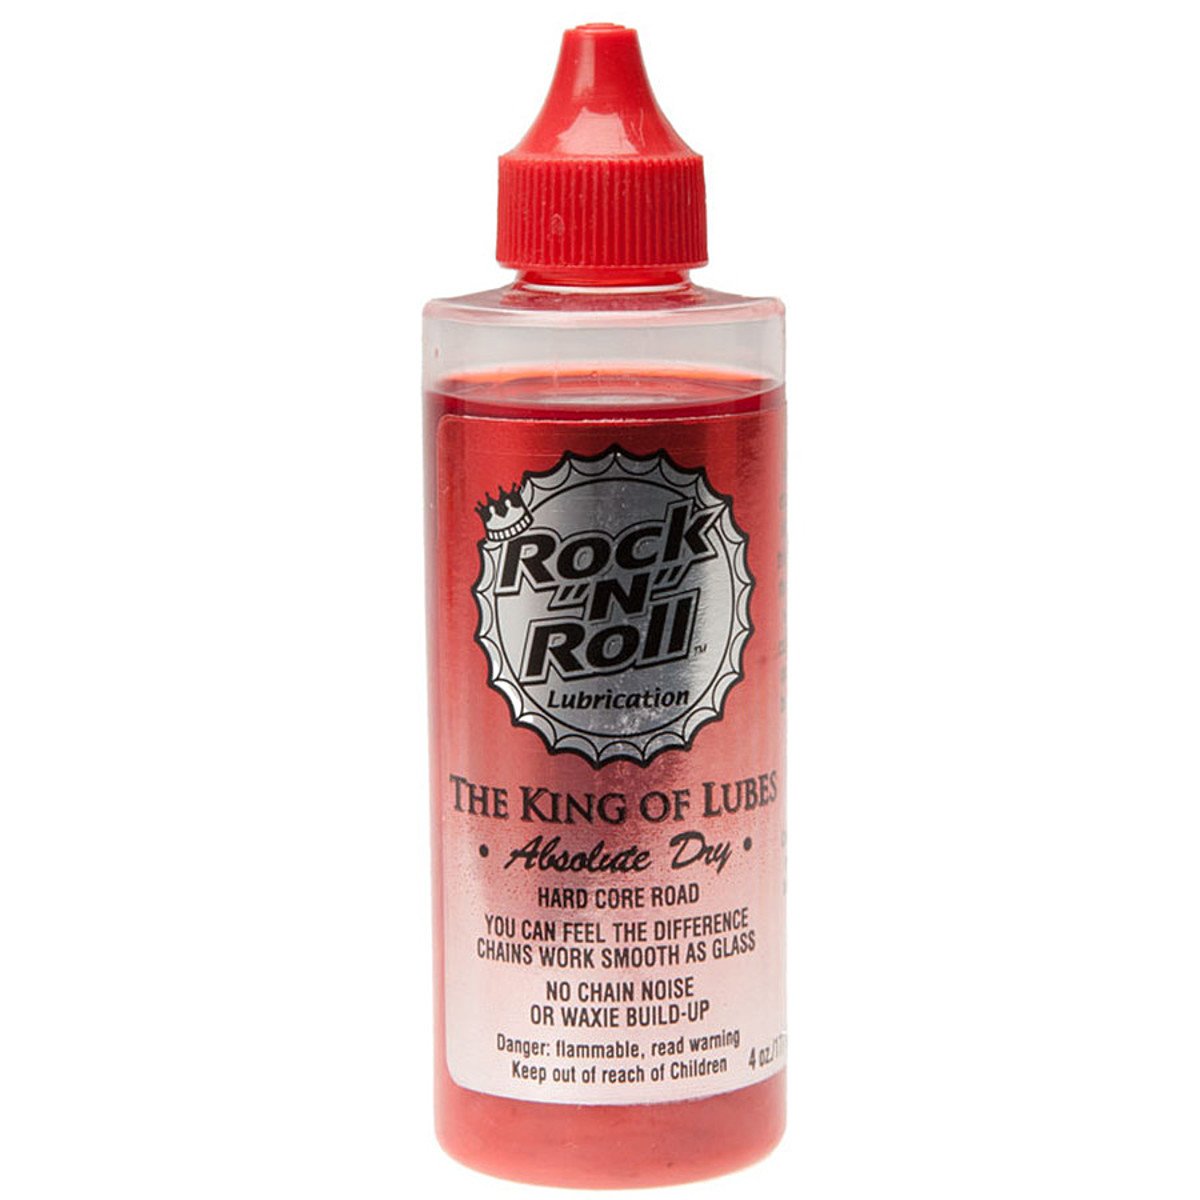 Rock "N" Roll Absolute Dry Chain Lube